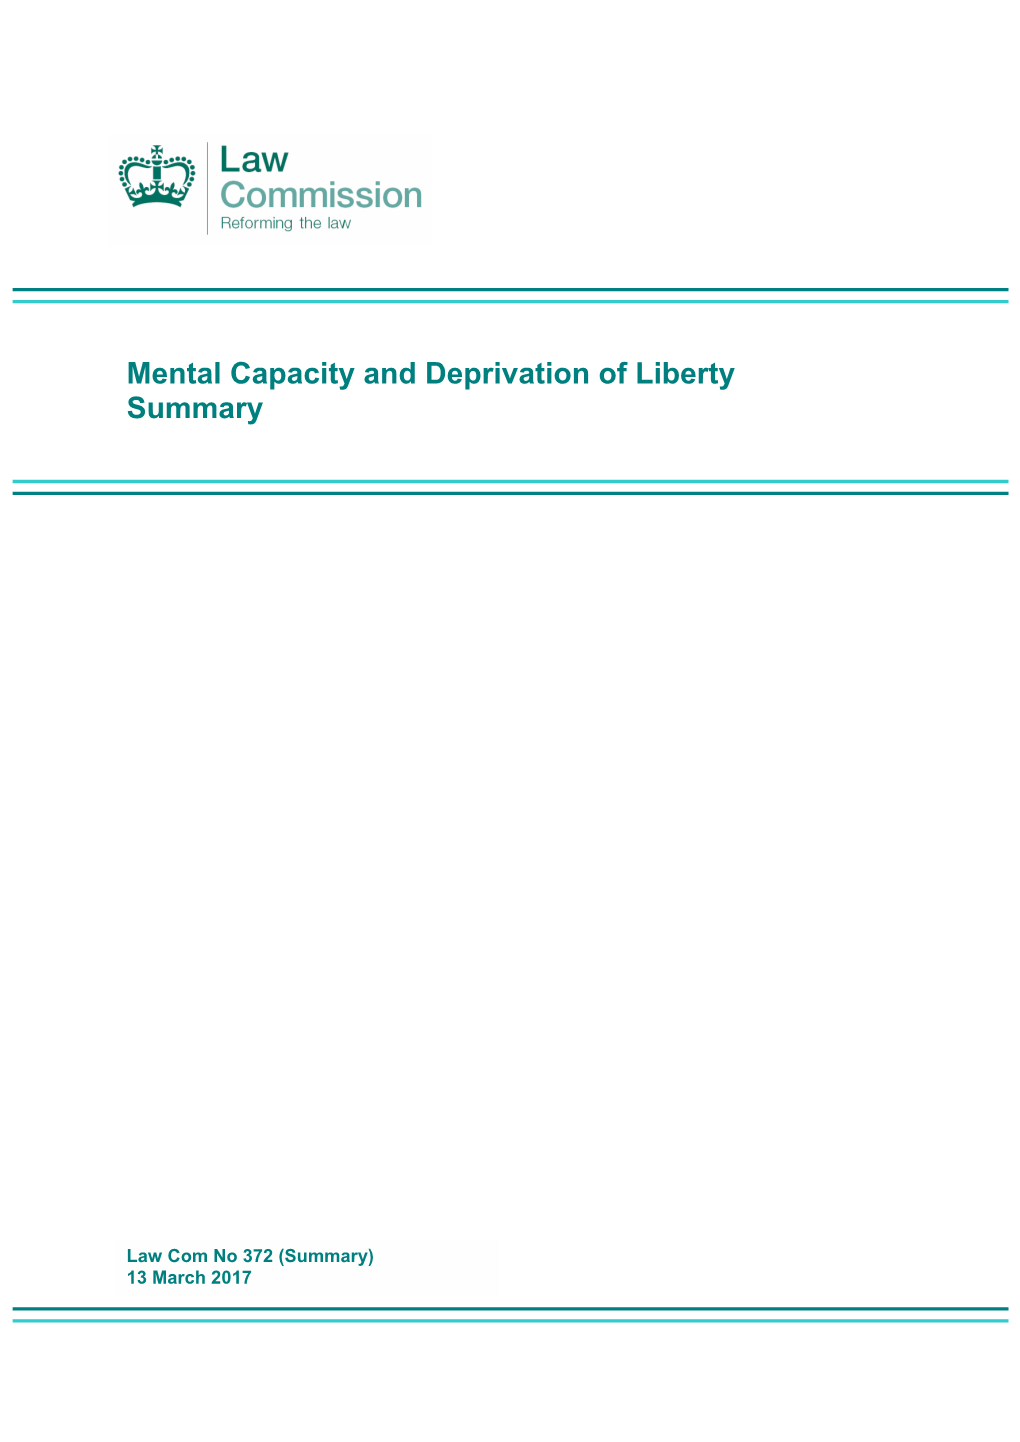 Mental Capacity and Deprivation of Liberty Summary